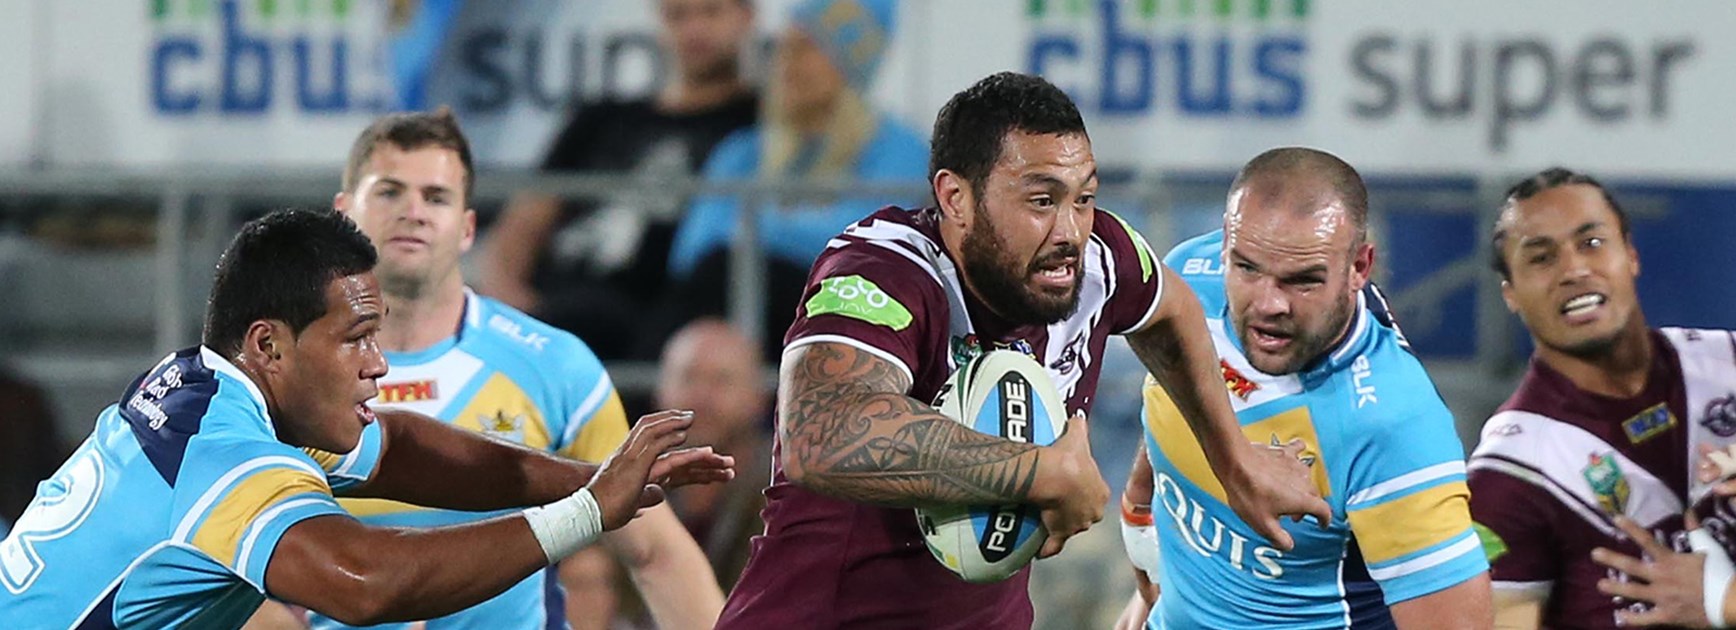 Manly forward Feleti Mateo in action against Gold Coast in Round 18 of the NRL Telstra Premiership.